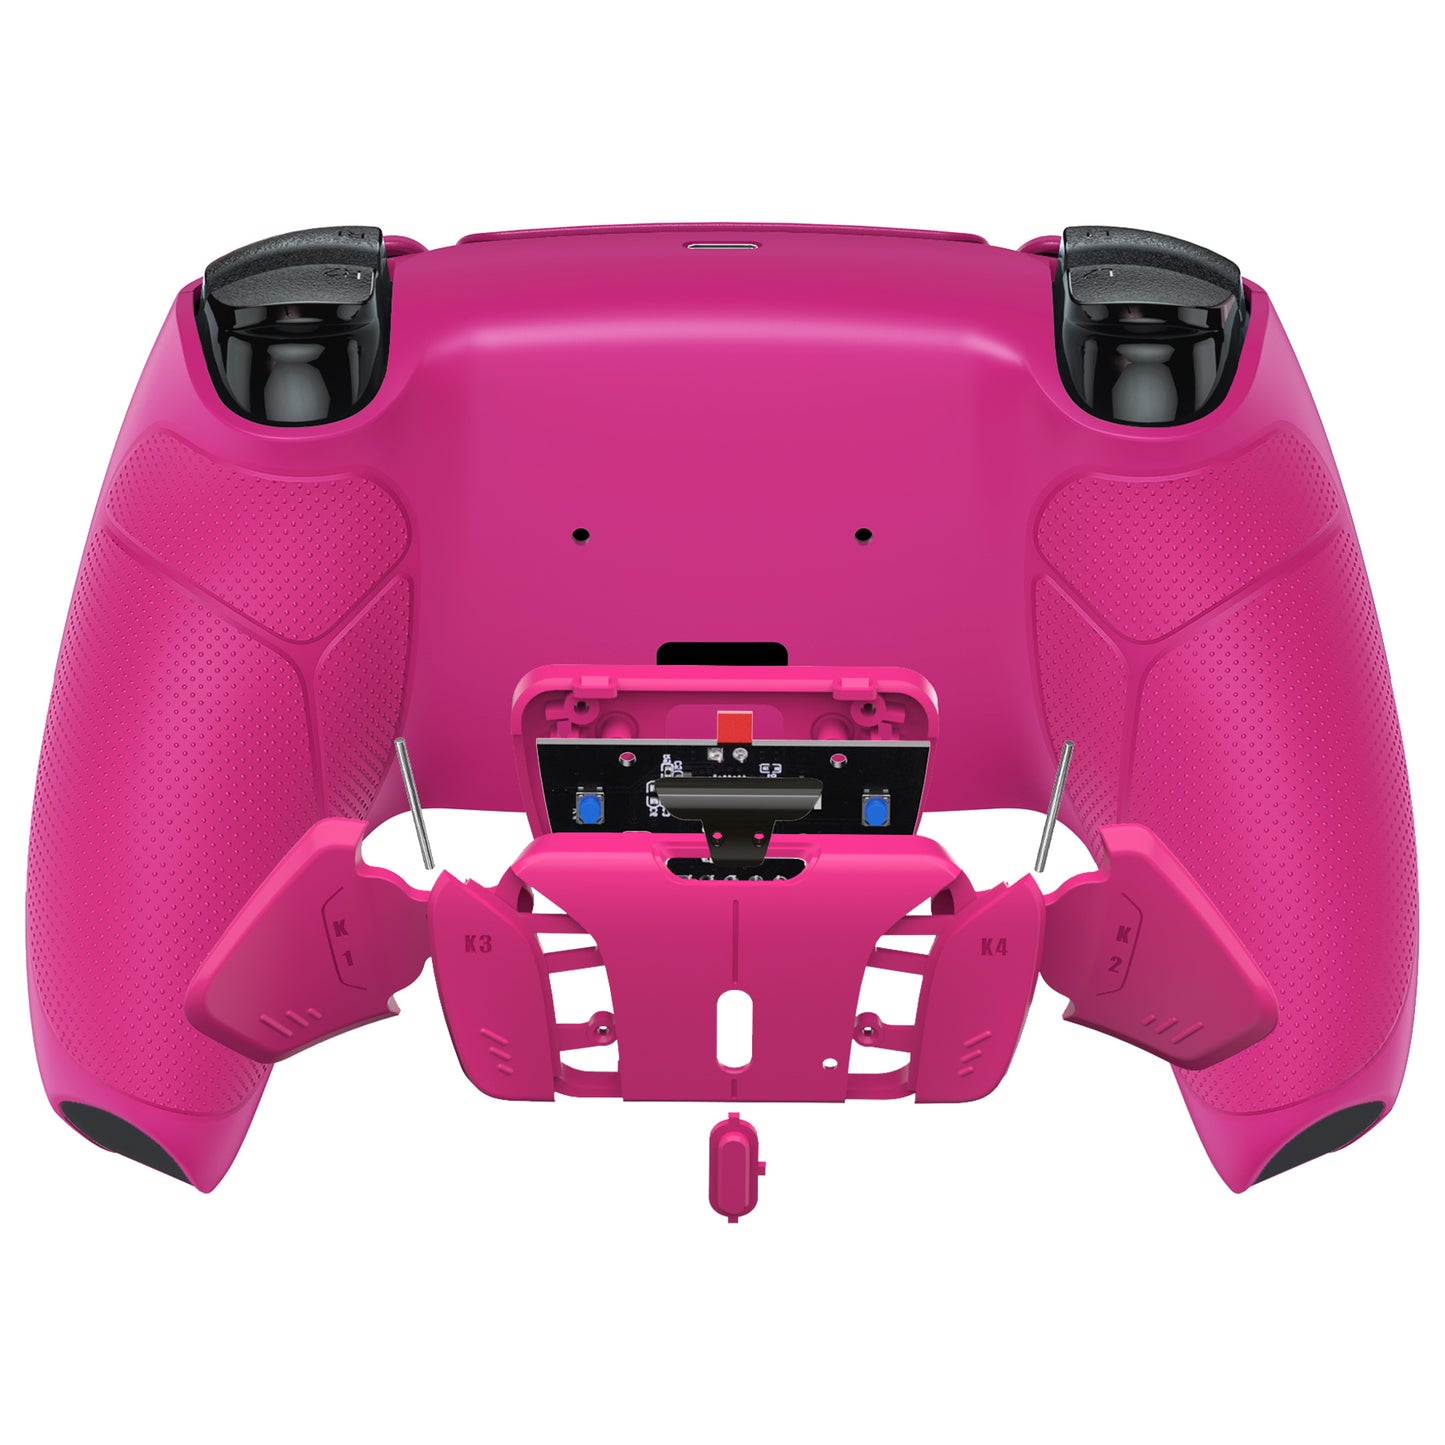 eXtremeRate Retail Nova Pink Rubberized Grip Remappable RISE4 Remap Kit for PS5 Controller BDM-030, Upgrade Board & Redesigned Nova Pink Back Shell & 4 Back Buttons for PS5 Controller - Controller NOT Included - YPFU6009G3